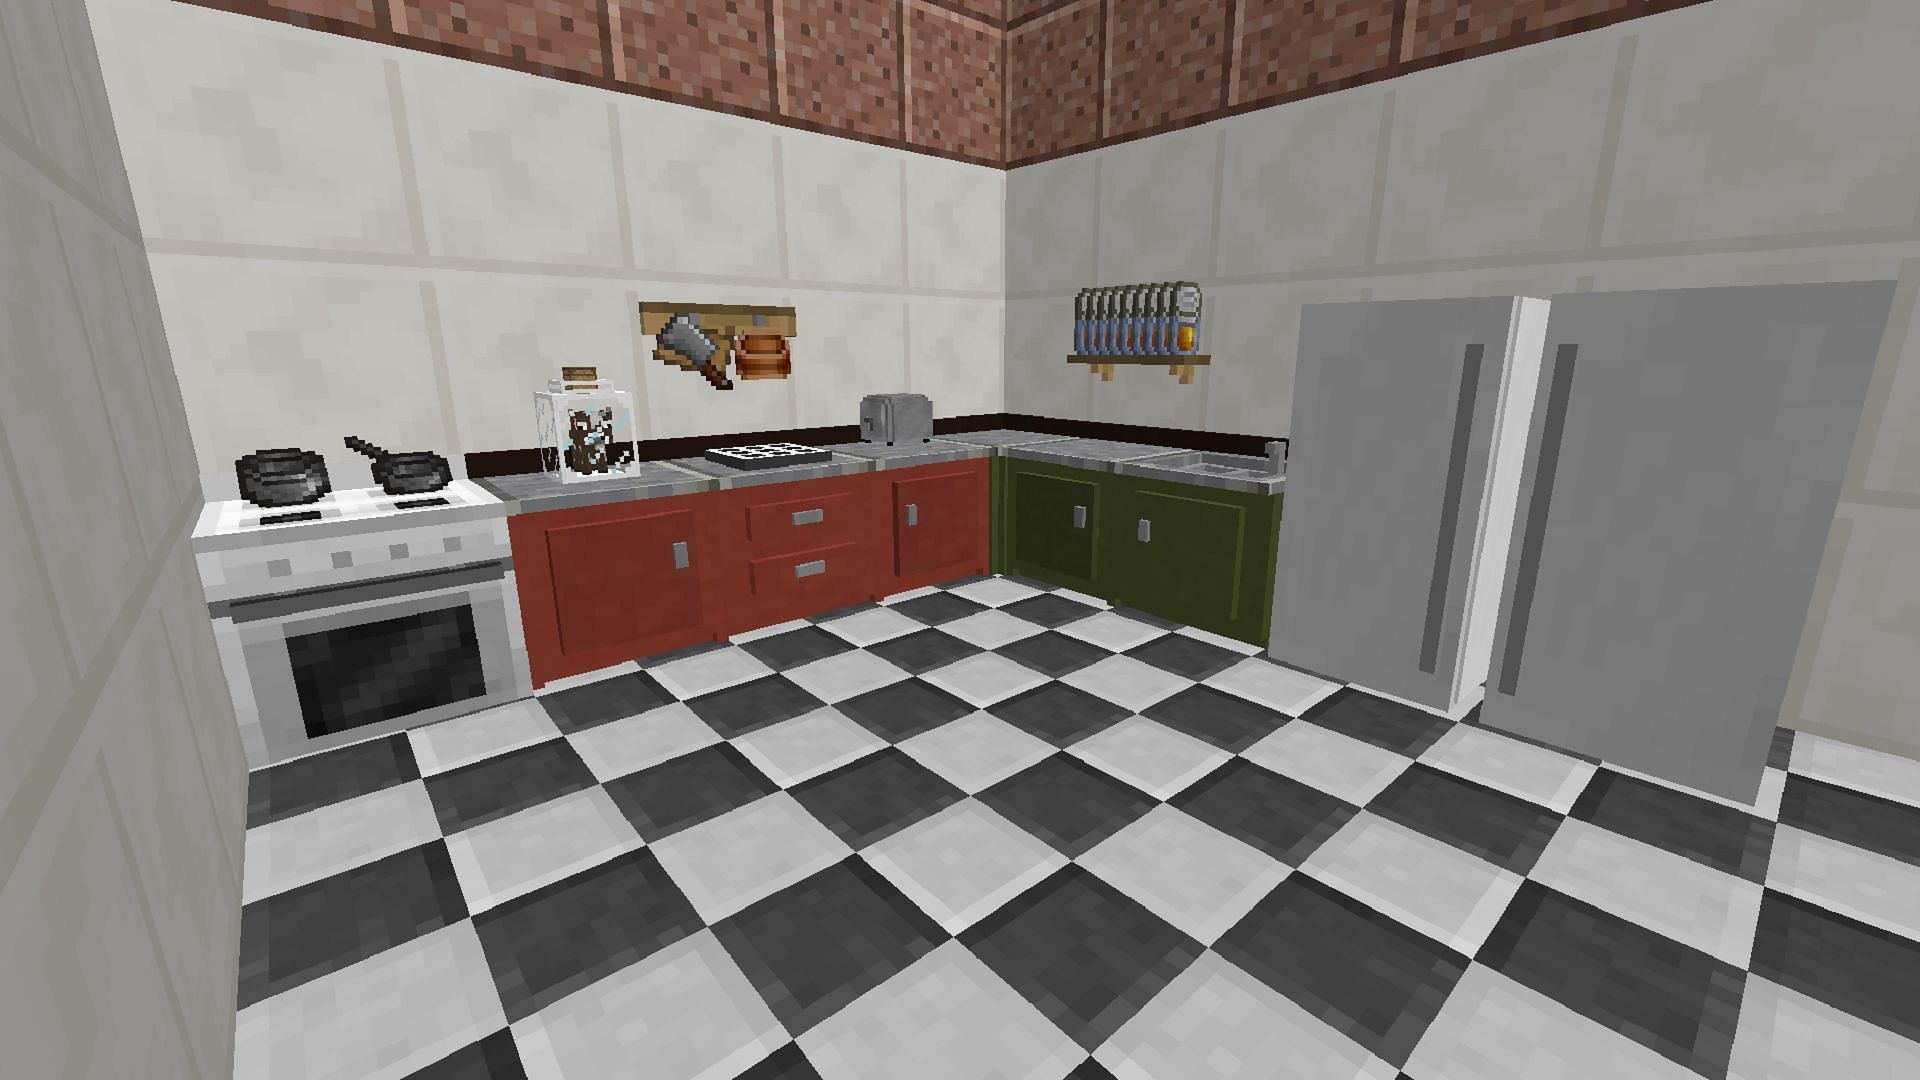 A multi-block kitchen as provided by the Minecraft mod Cooking for Blockheads (Image via BlayTheNinth/CurseForge)